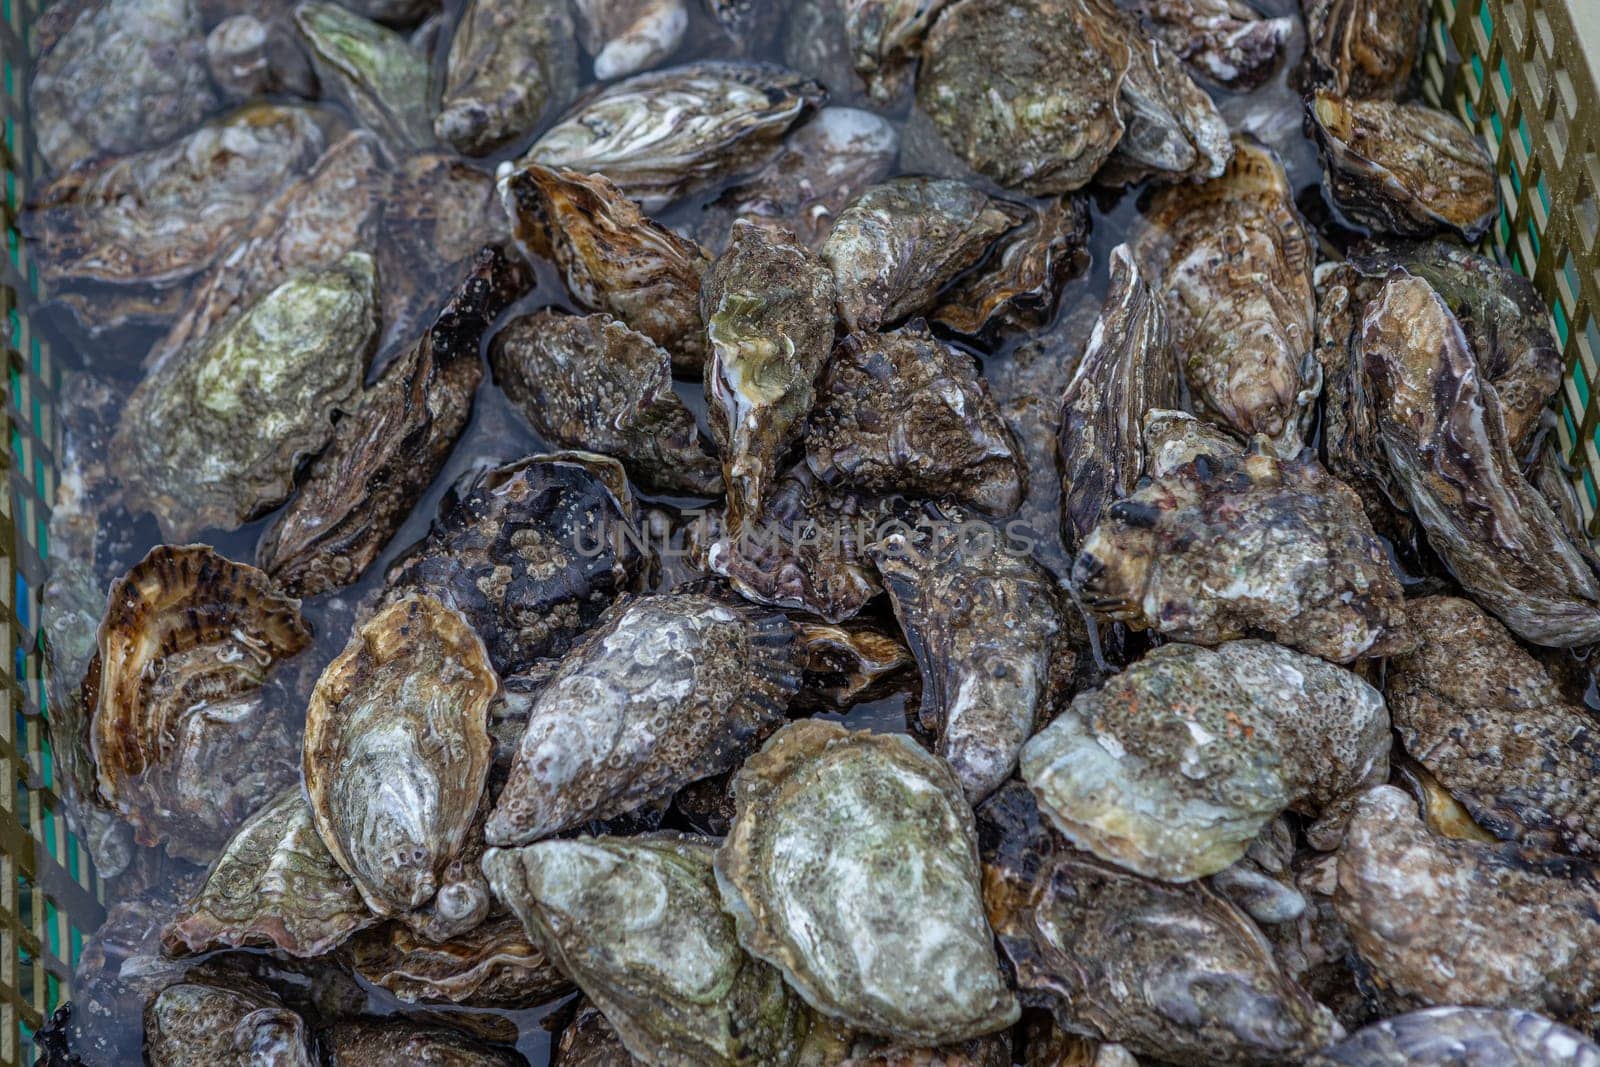 Oysters in containers with water at oyster farm at Saint-Vaast-la-Hougue, Normandy region, by JPC-PROD